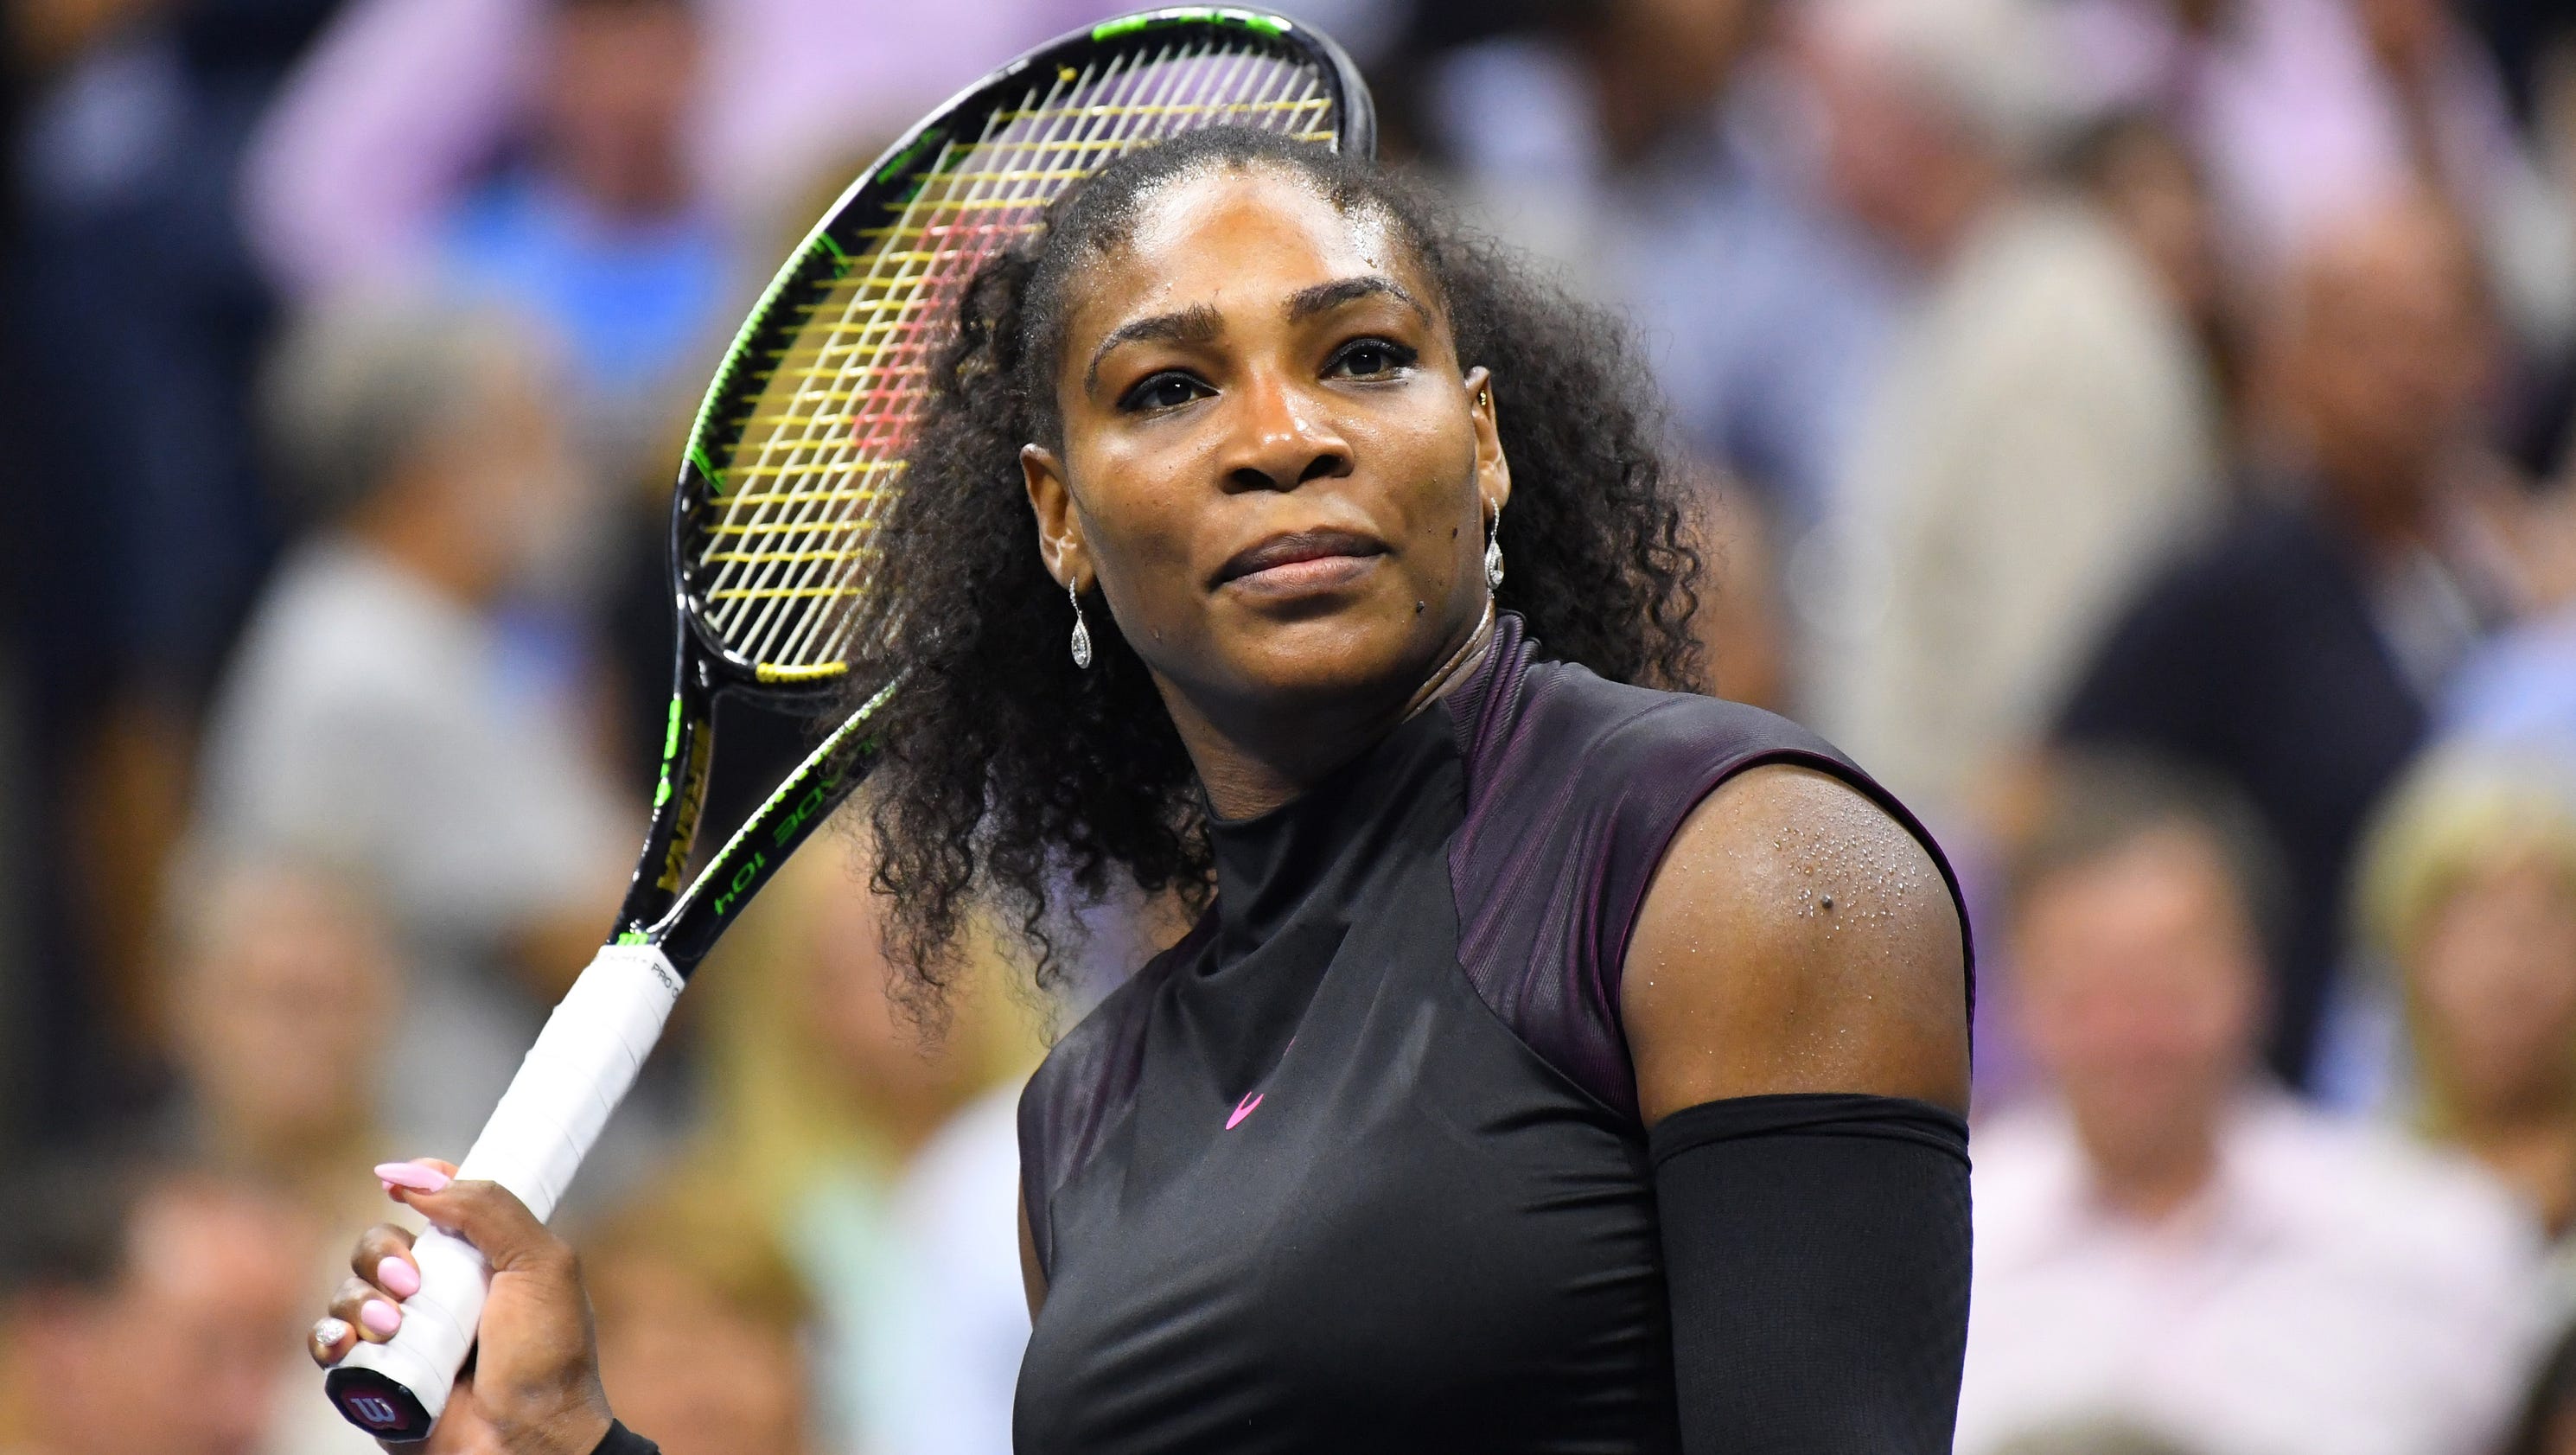 Serena Williams will play in Fed Cup next month3200 x 1680